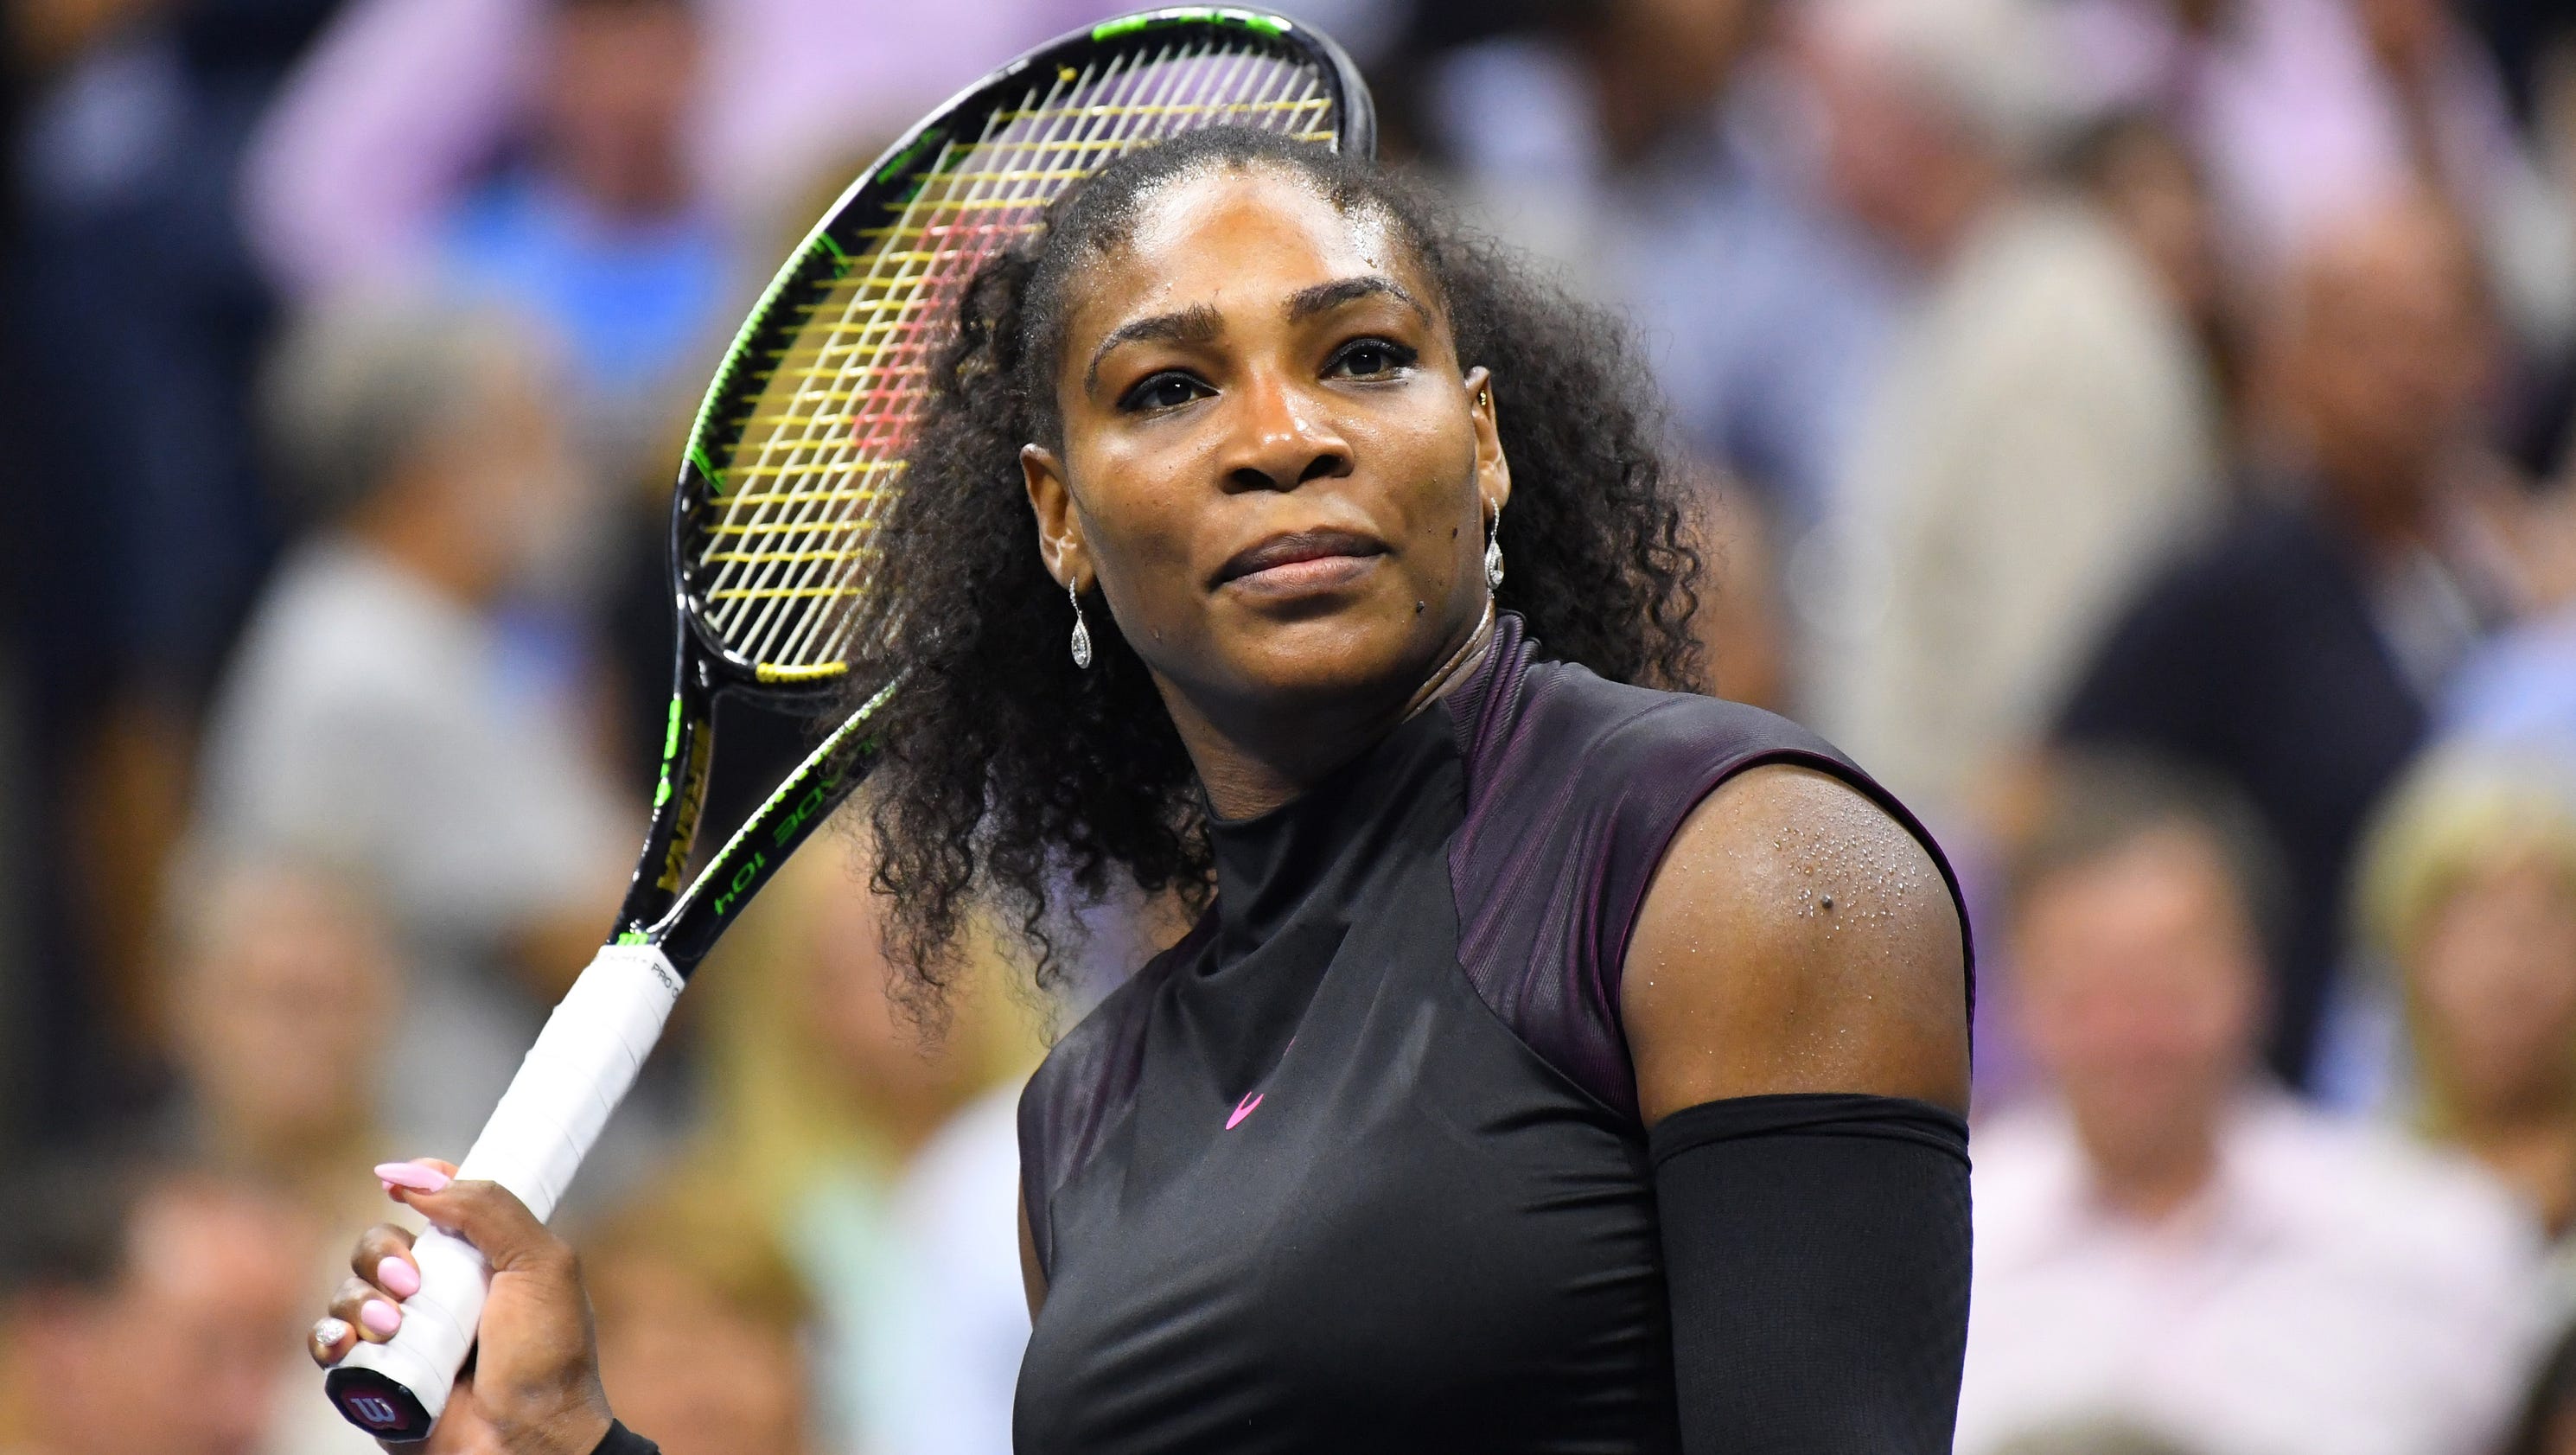 Serena Williams will play in Fed Cup next month3200 x 1680